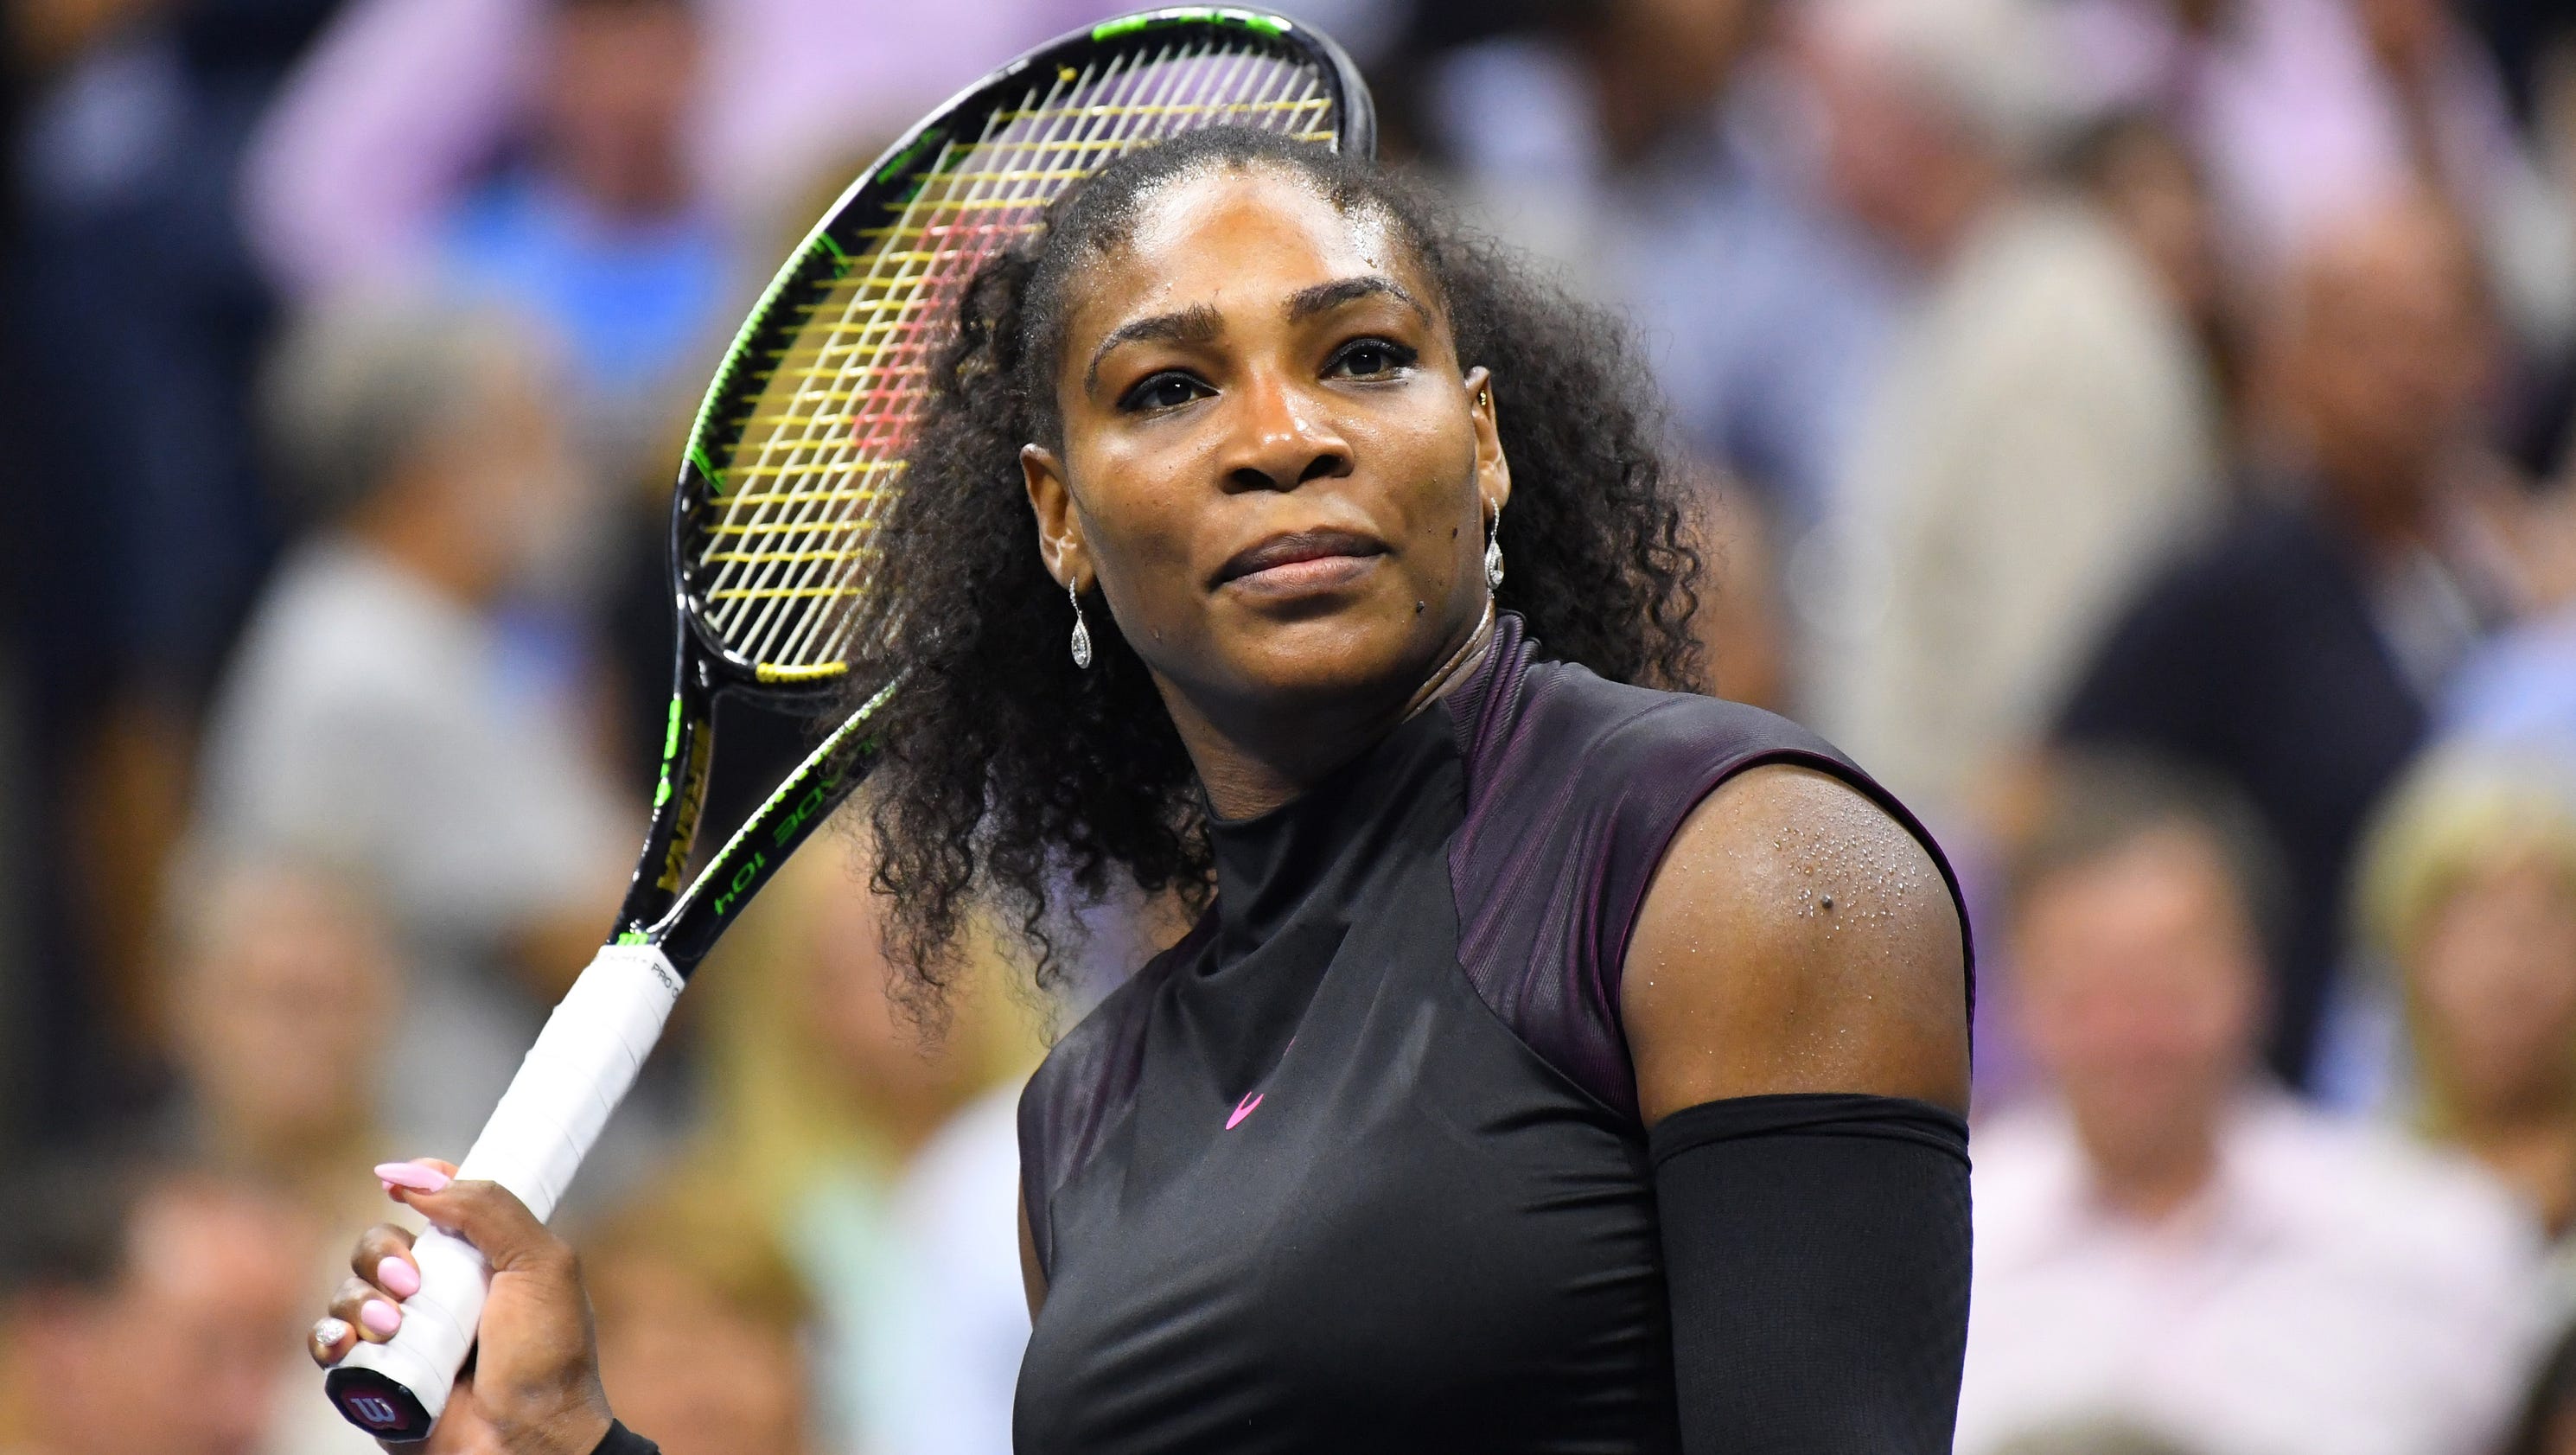 Serena Williams will play in Fed Cup next month3200 x 1680